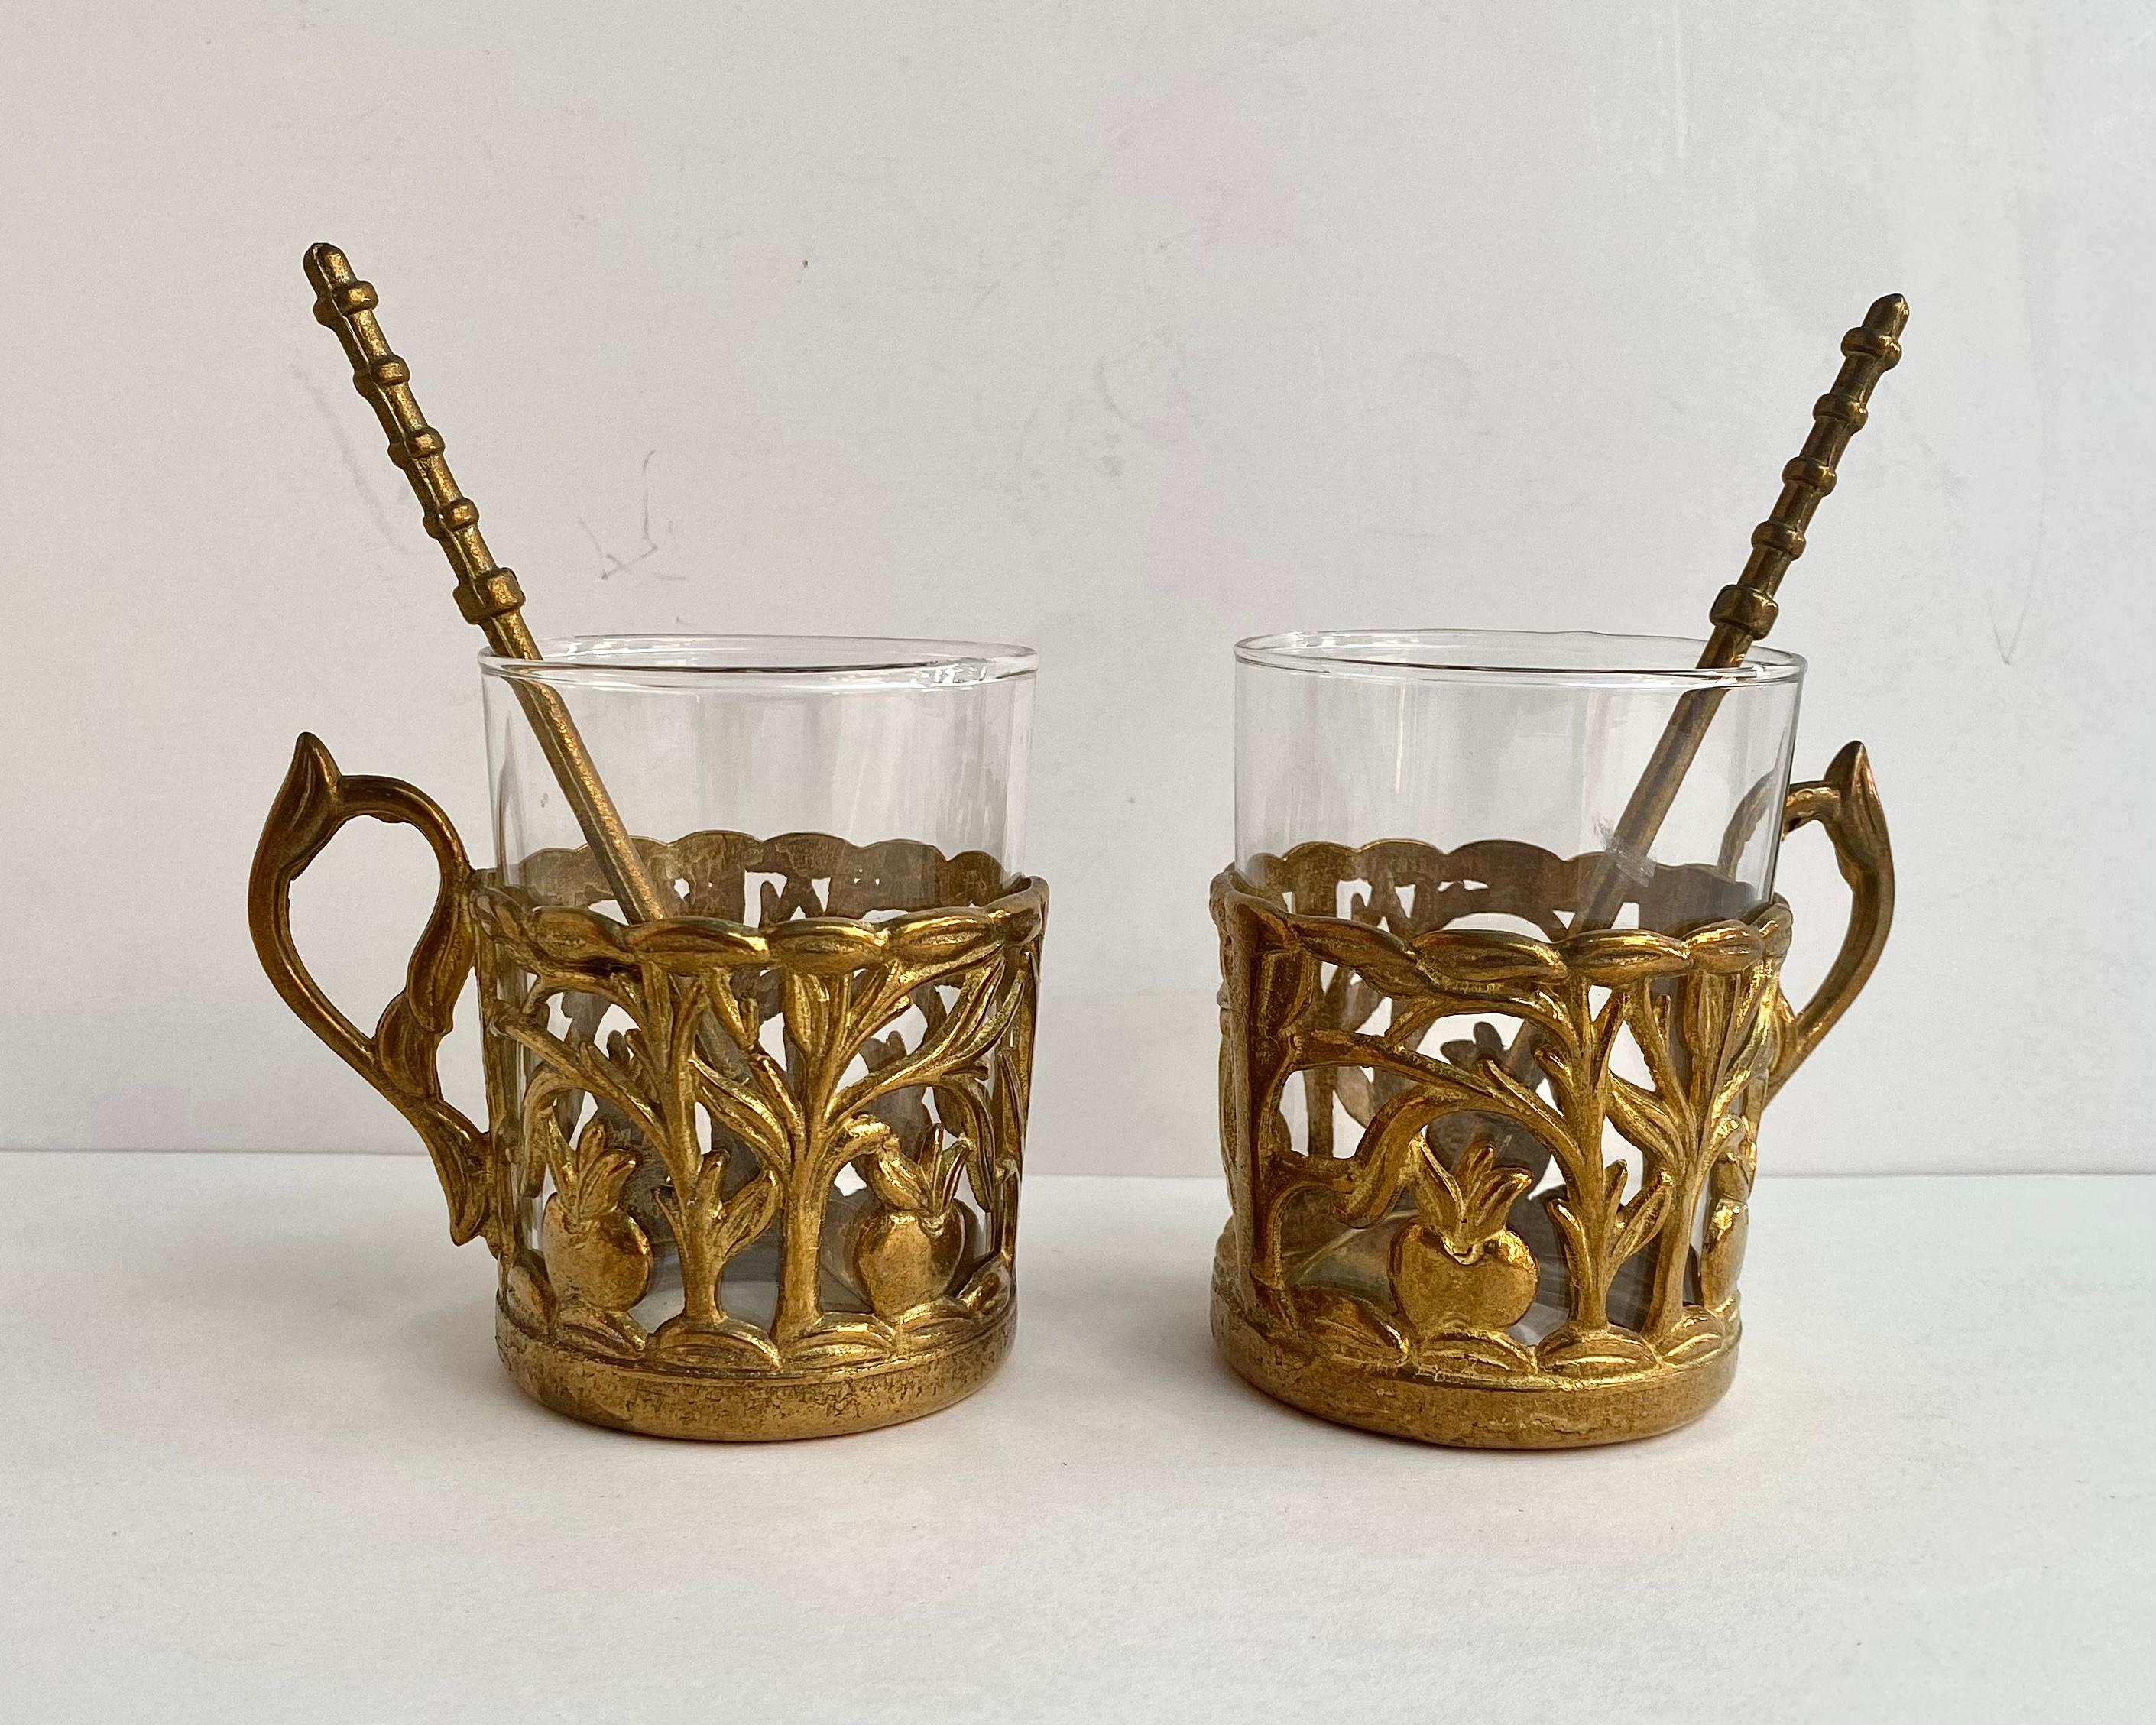 The original set of antique utensils for tea consists of 2 glass tea cups, brass glass holders and spoons.

Manufactured in France.

Please yourself or your loved ones with beautiful and elite tableware.

Handmade. Brass, glass. Engraving,